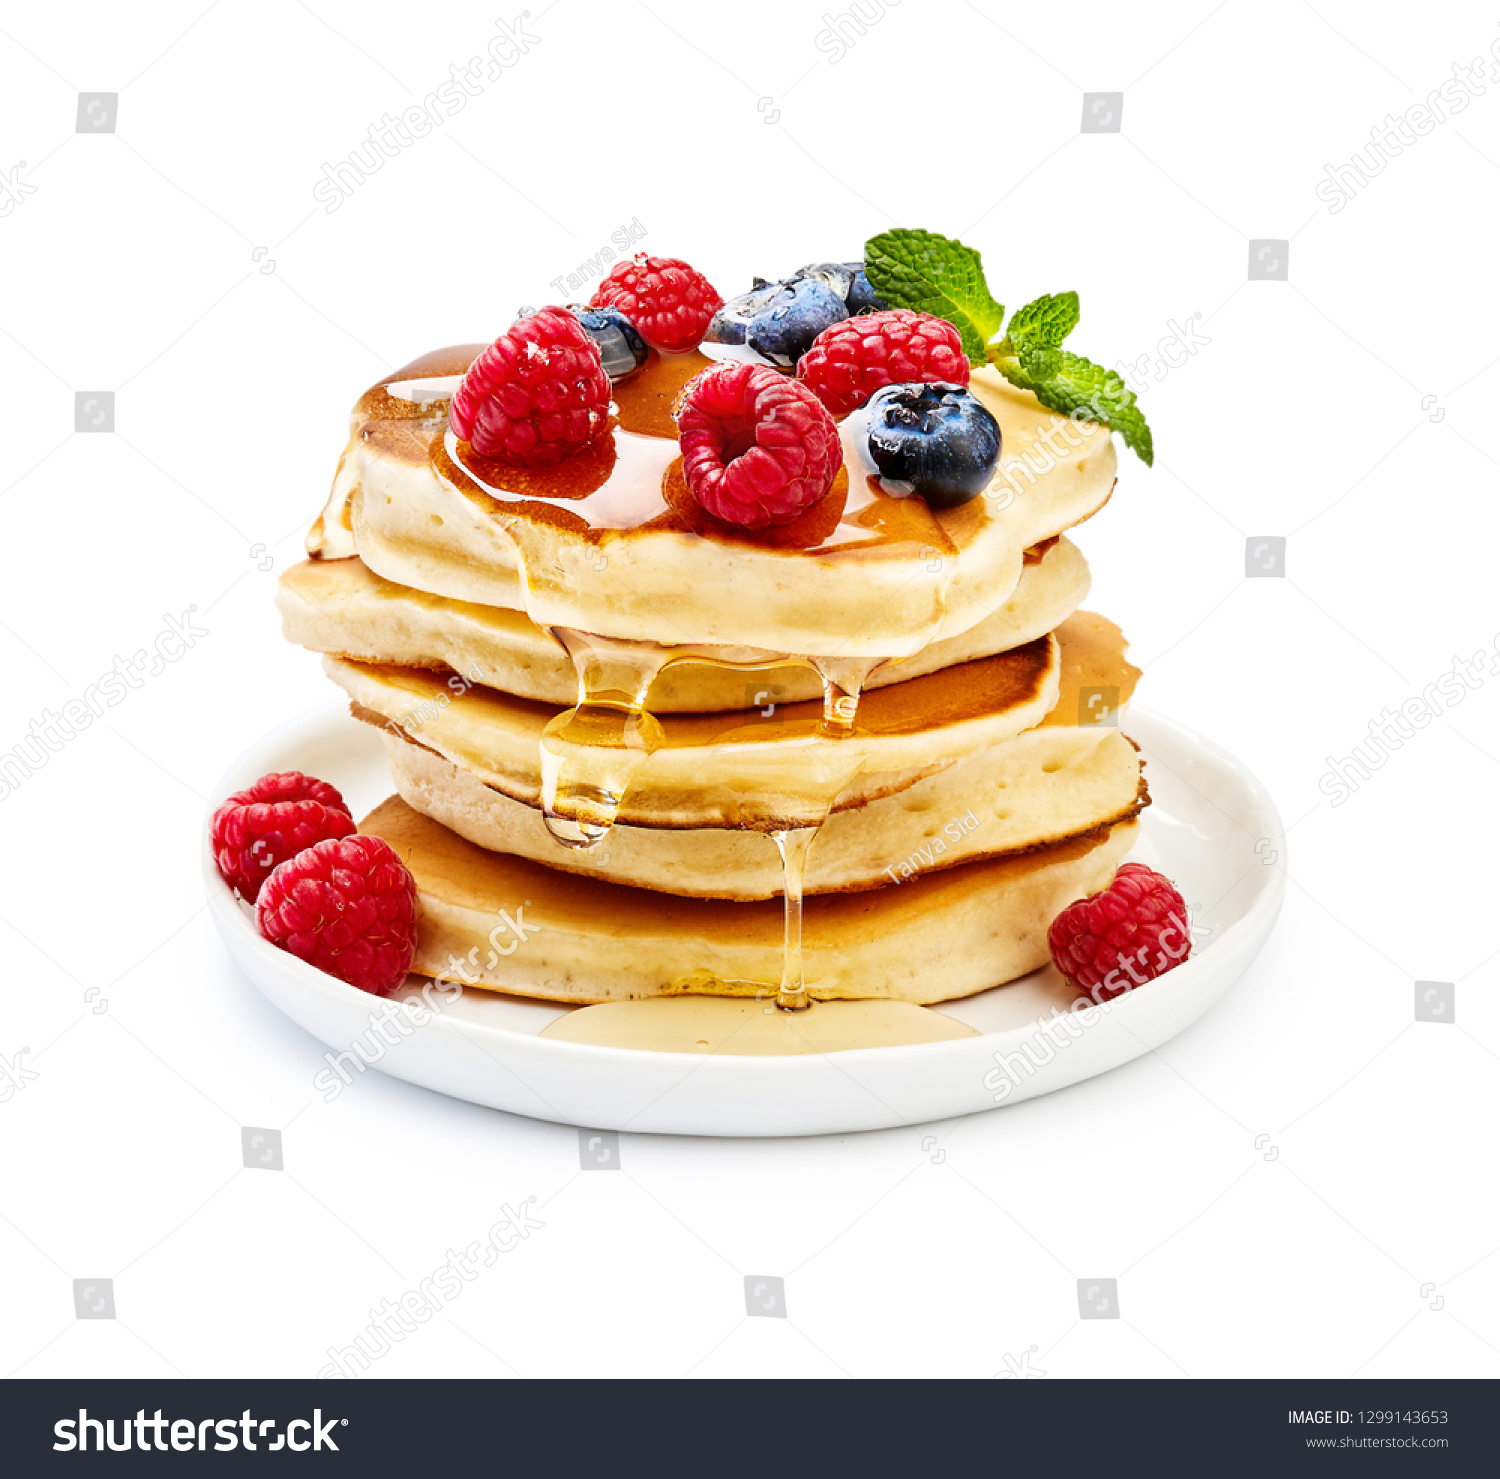 Delicious pancakes with berries, honey or maple syrup. Homemade pancakes and sweet syrup on white plate isolated. #1299143653